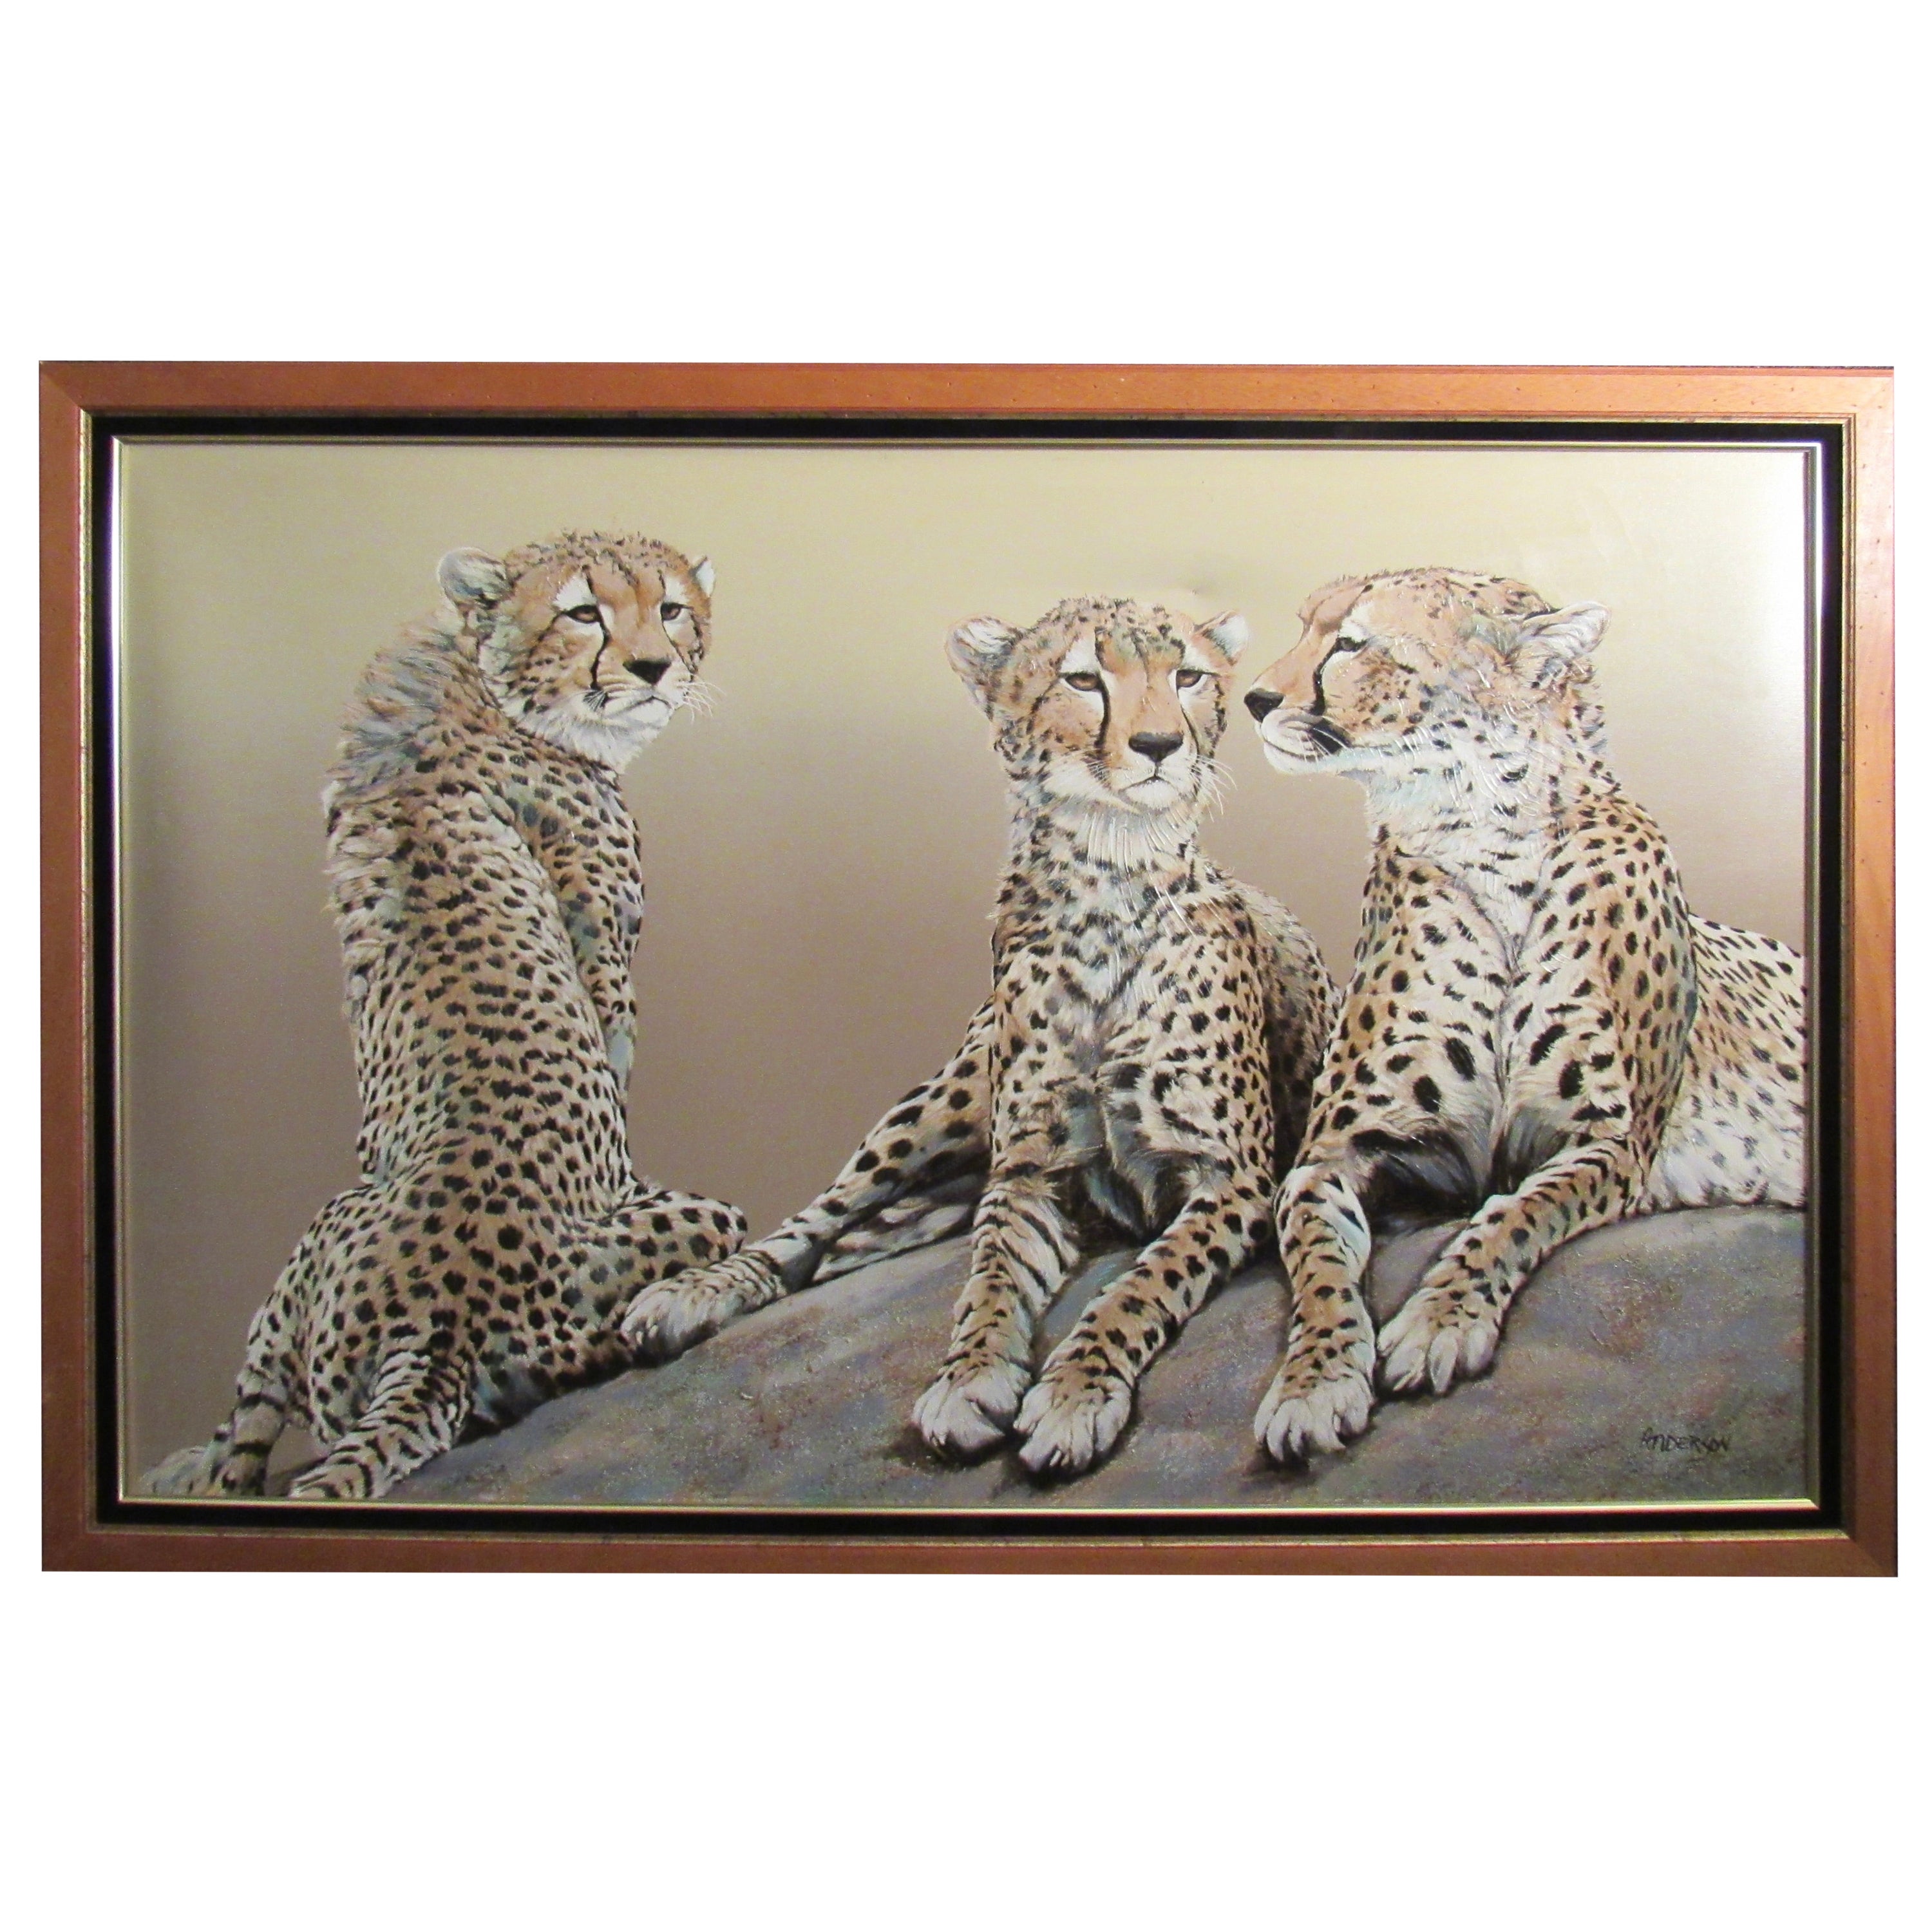 Massive Cheetah Coalition Oil Painting by Anderson For Sale